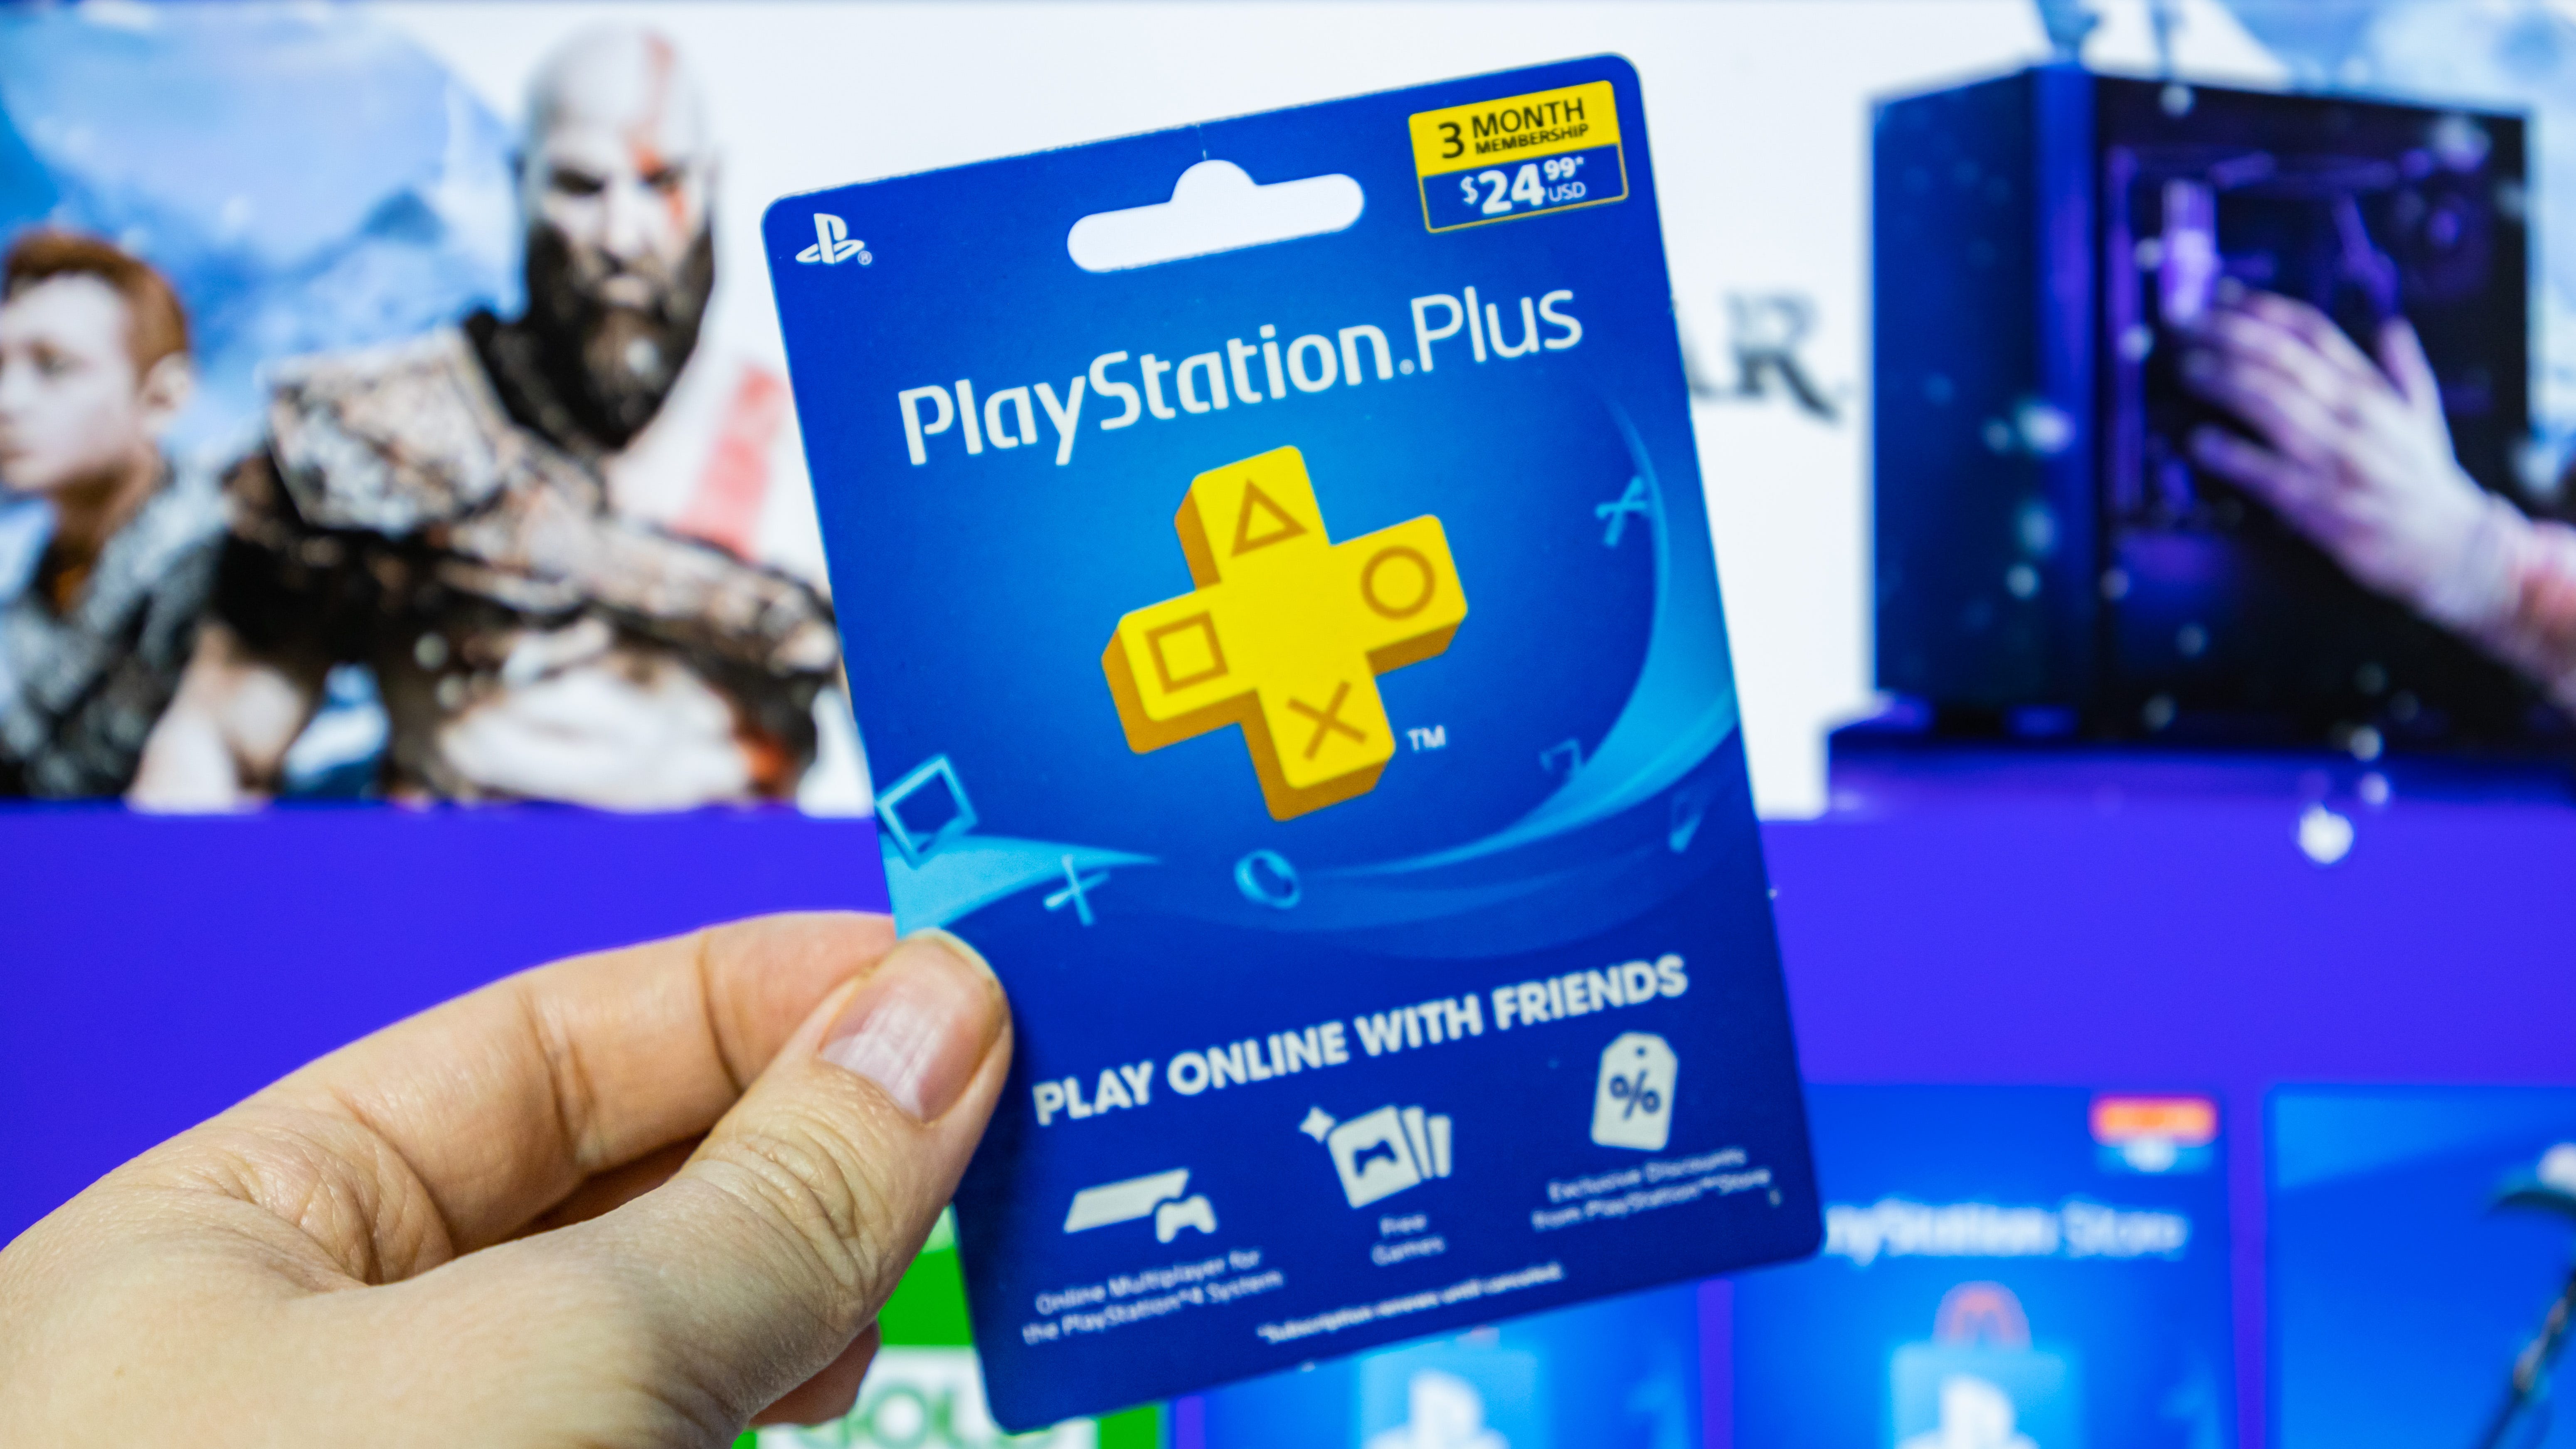 PlayStation Plus discount code: get it before Sony's price increase